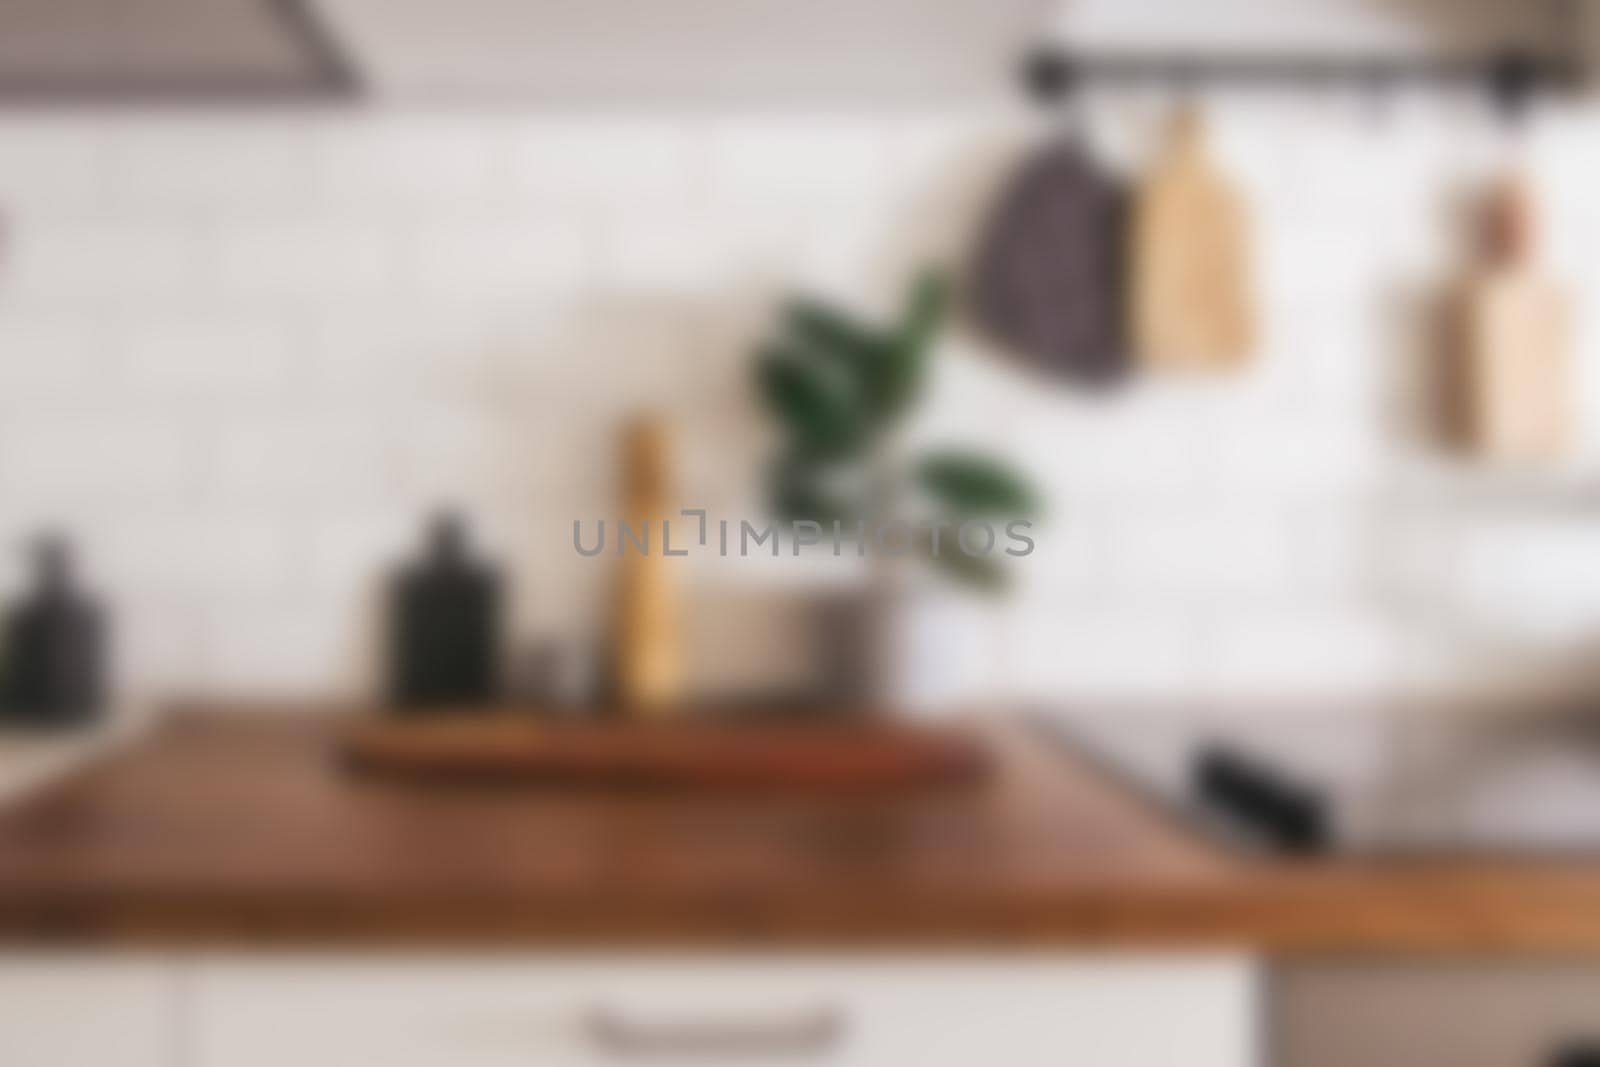 Kitchen brass utensils, chef accessories - blurred kitchen background . Hanging kitchen with white tiles wall and wood tabletop.Green plant on kitchen background by katrinaera